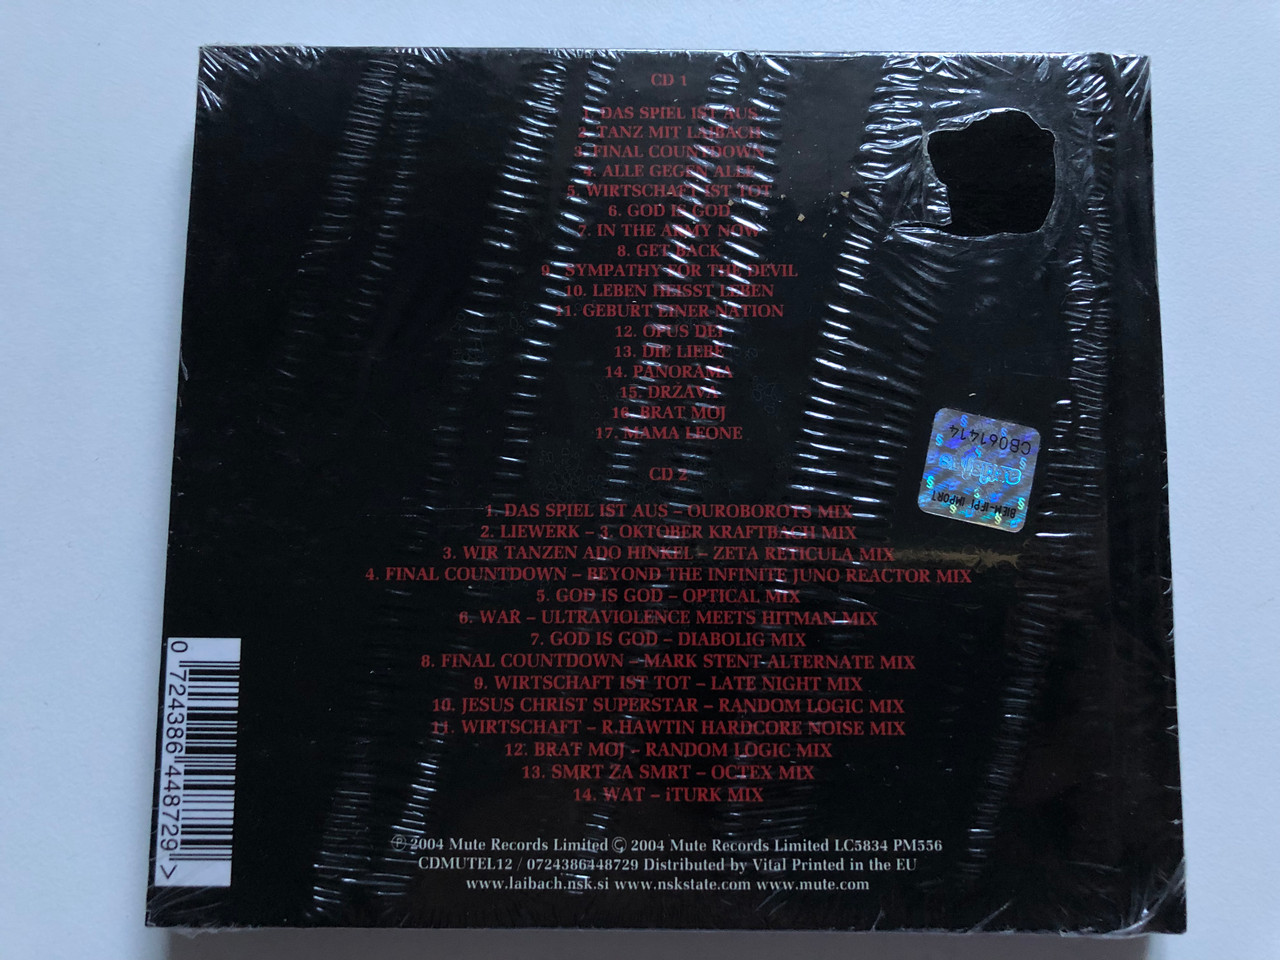 https://cdn10.bigcommerce.com/s-62bdpkt7pb/products/0/images/251073/Laibach_Anthems_2CD_containing_44_page_booklet_with_essential_Laibach_paintings_and_songs_from_1980-2004_More_than_150mins_of_music_including_previously_unreleased_material_Mute_2x_Au__69235.1661334883.1280.1280.JPG?c=2&_gl=1*12km3yx*_ga*MjA2NTIxMjE2MC4xNTkwNTEyNTMy*_ga_WS2VZYPC6G*MTY2MTMxOTg5Ni41MzYuMS4xNjYxMzM0OTc2LjYwLjAuMA..